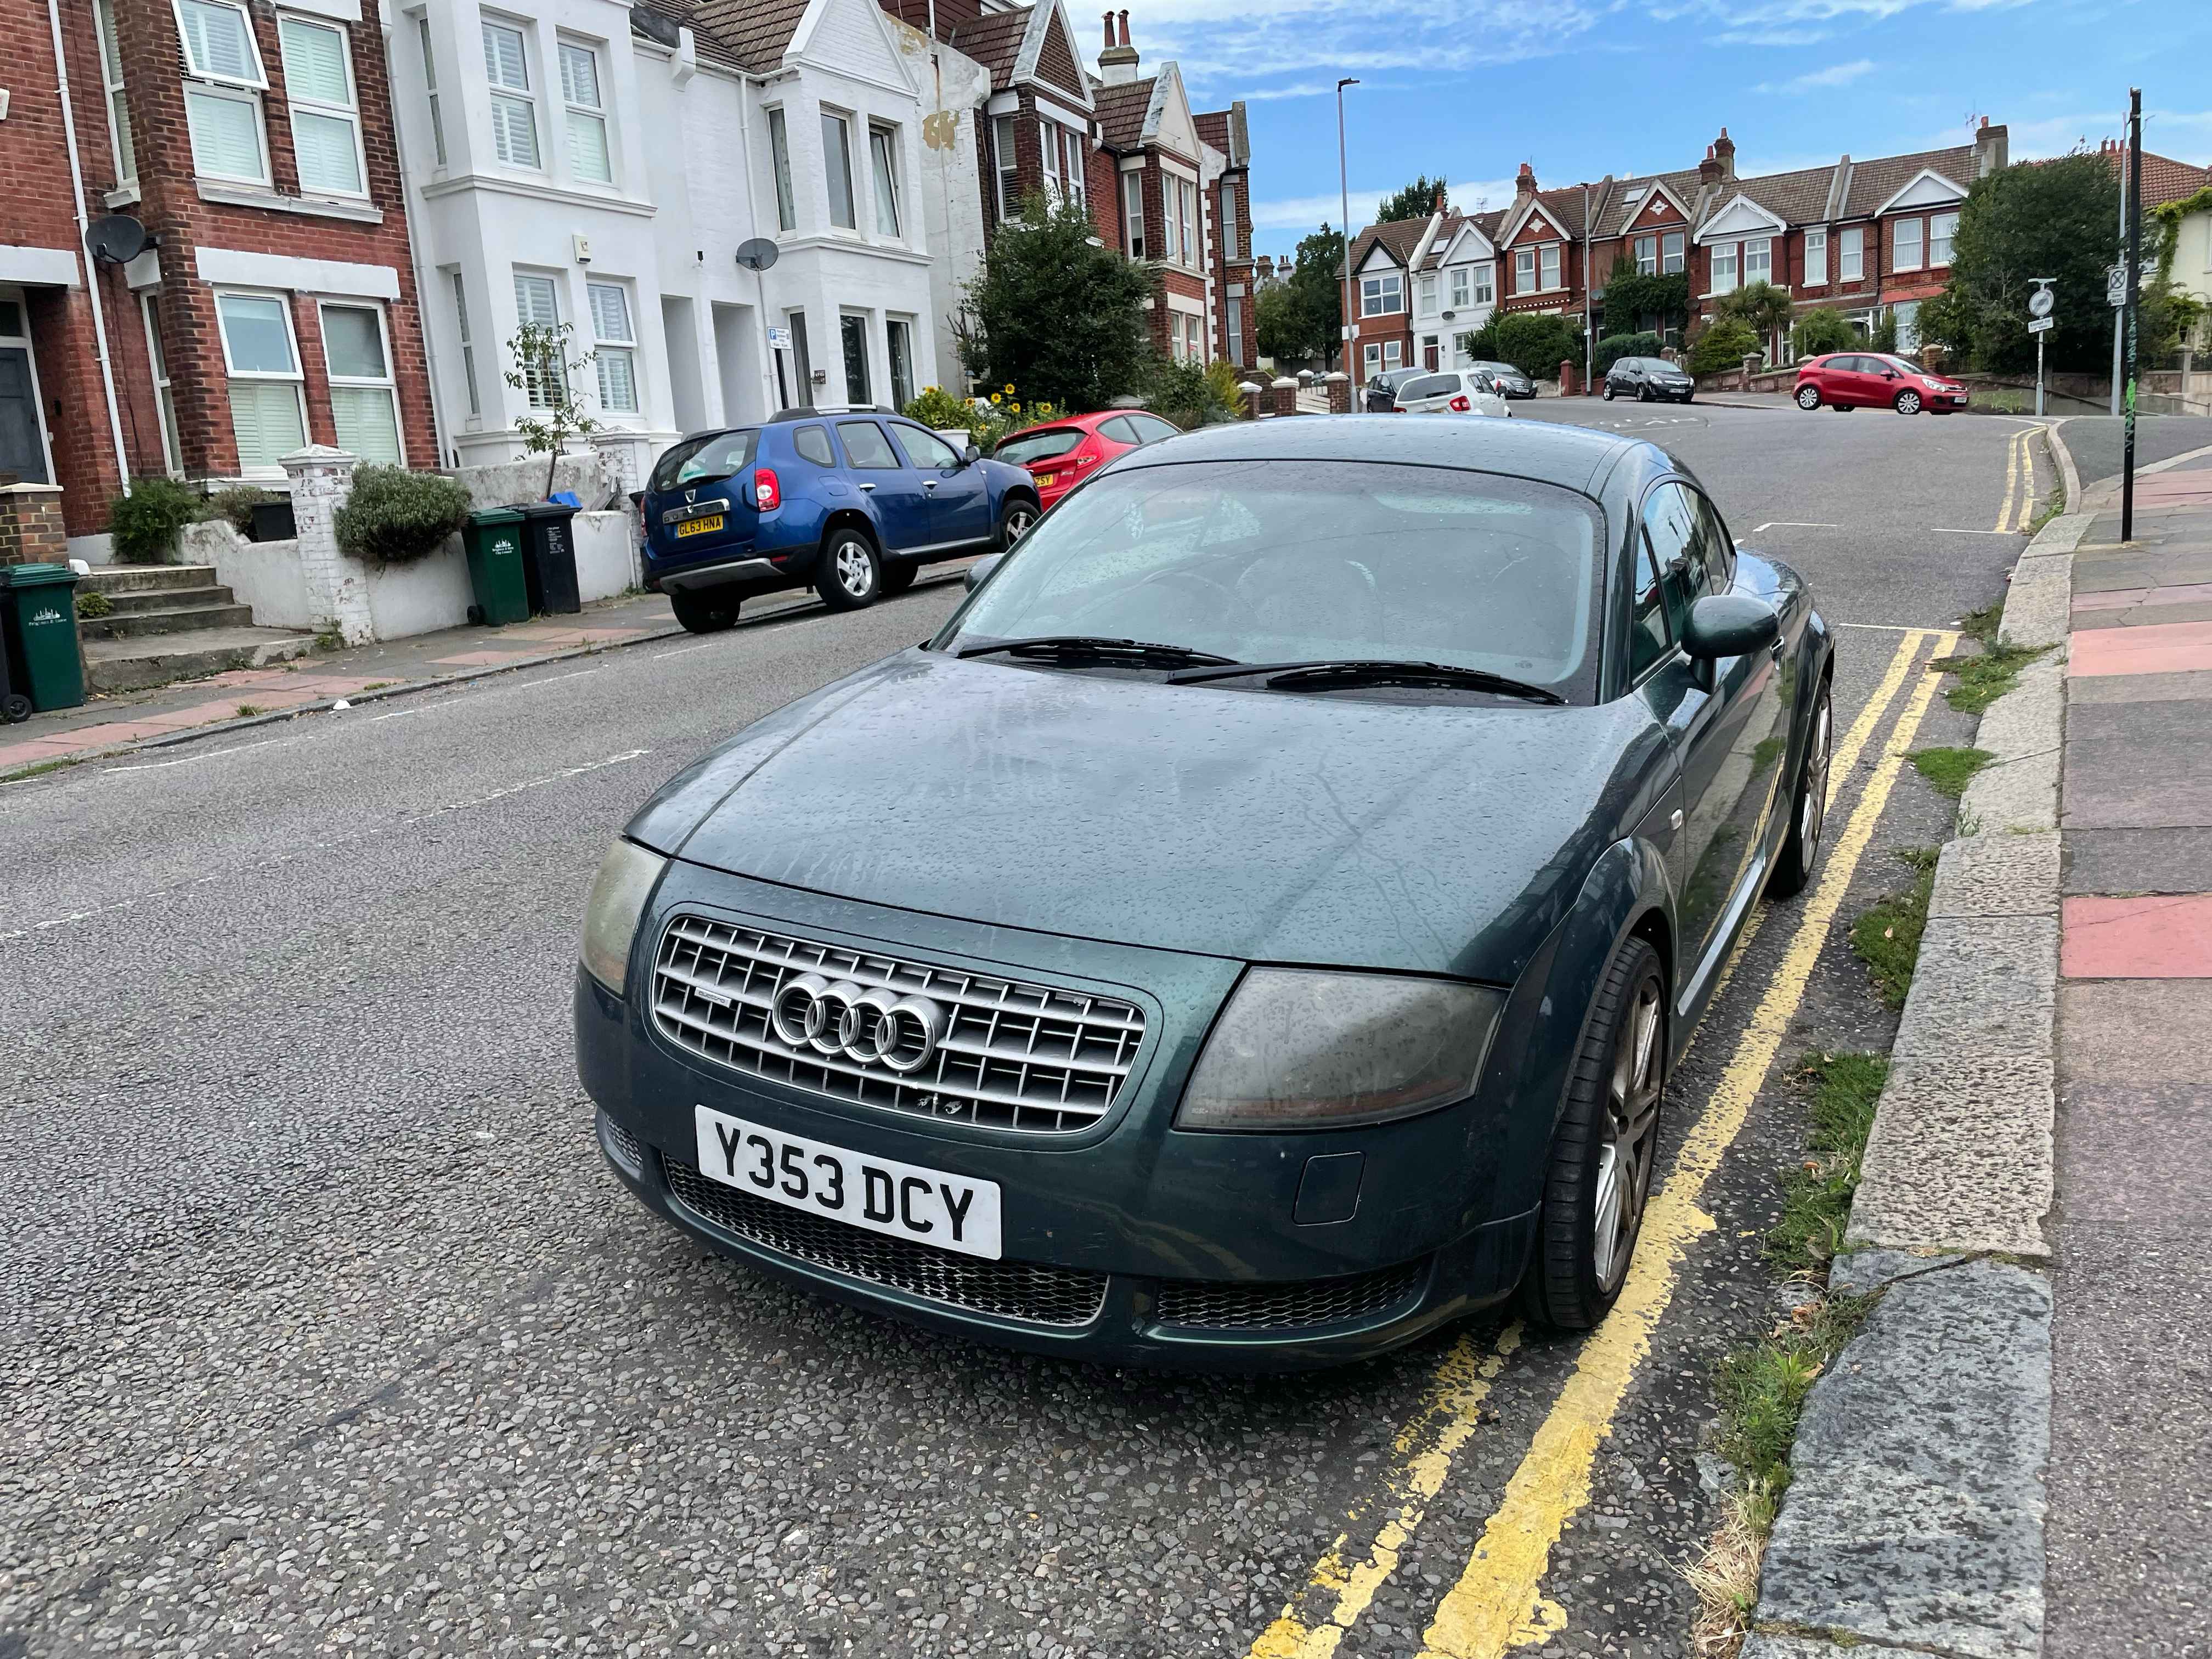 Photograph of Y353 DCY - a Green Audi TT parked in Hollingdean by a non-resident. 